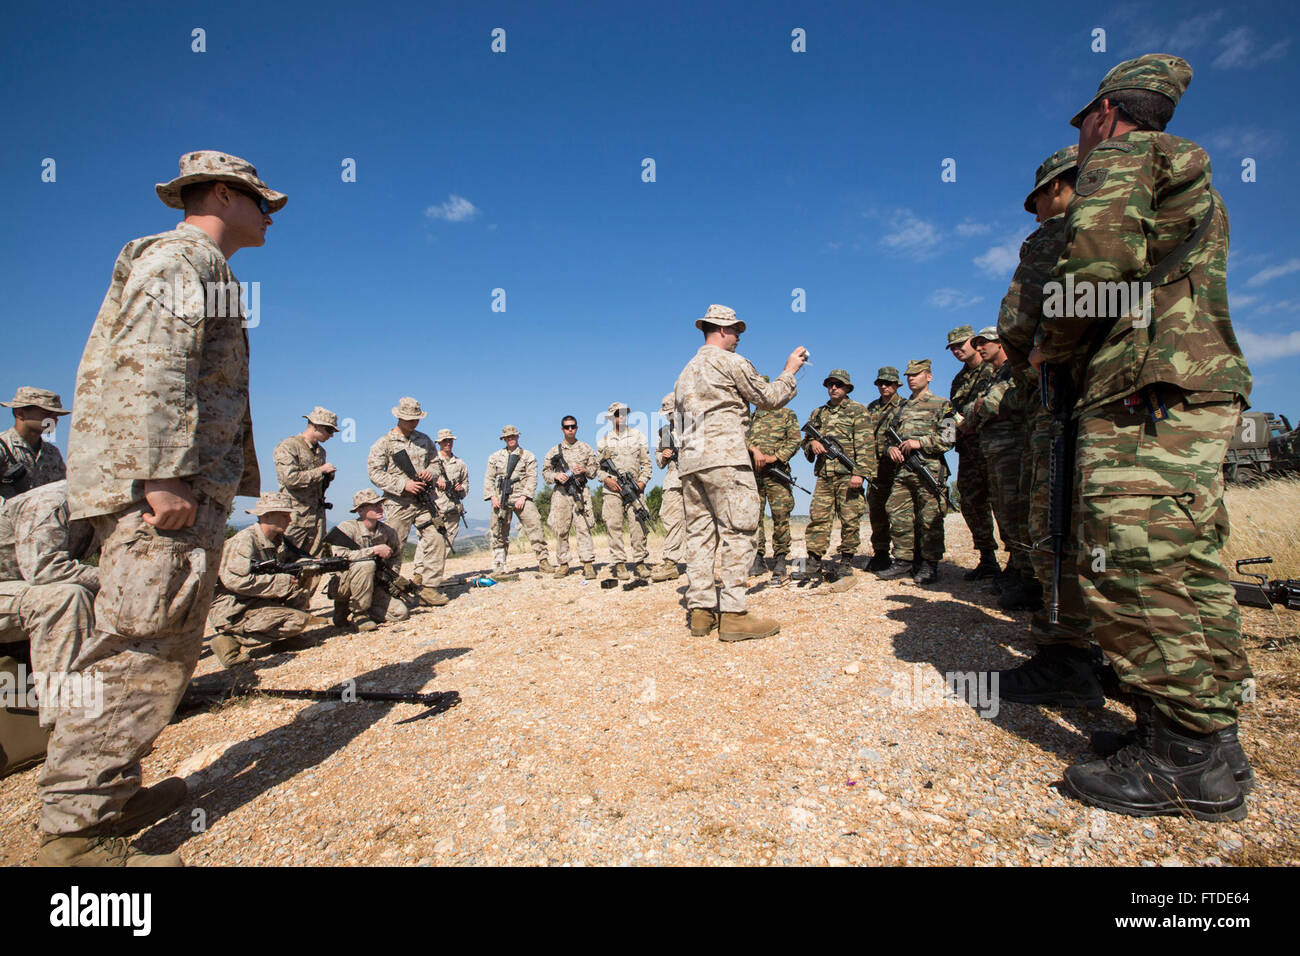 150626-M-YH418-012: VOLOS, Greece (June 26, 2015) – Staff Sgt. Jeff Stockton, center, an explosive ordnance disposal technician with the 24th Marine Expeditionary Unit (MEU), gives a class on different types of IEDs to a group of Marines with India Company, Battalion Landing Team 3rd Battalion, 6th Marine Regiment, 24th Marine Expeditionary Unit, and Greek Marines with the 521st Marine Battalion at a training site near Volos, Greece, June 26, 2015 as part of a bilateral training exercise. The 24th MEU is embarked on the ships of the Iwo Jima Amphibious Ready Group and is conducting naval opera Stock Photo